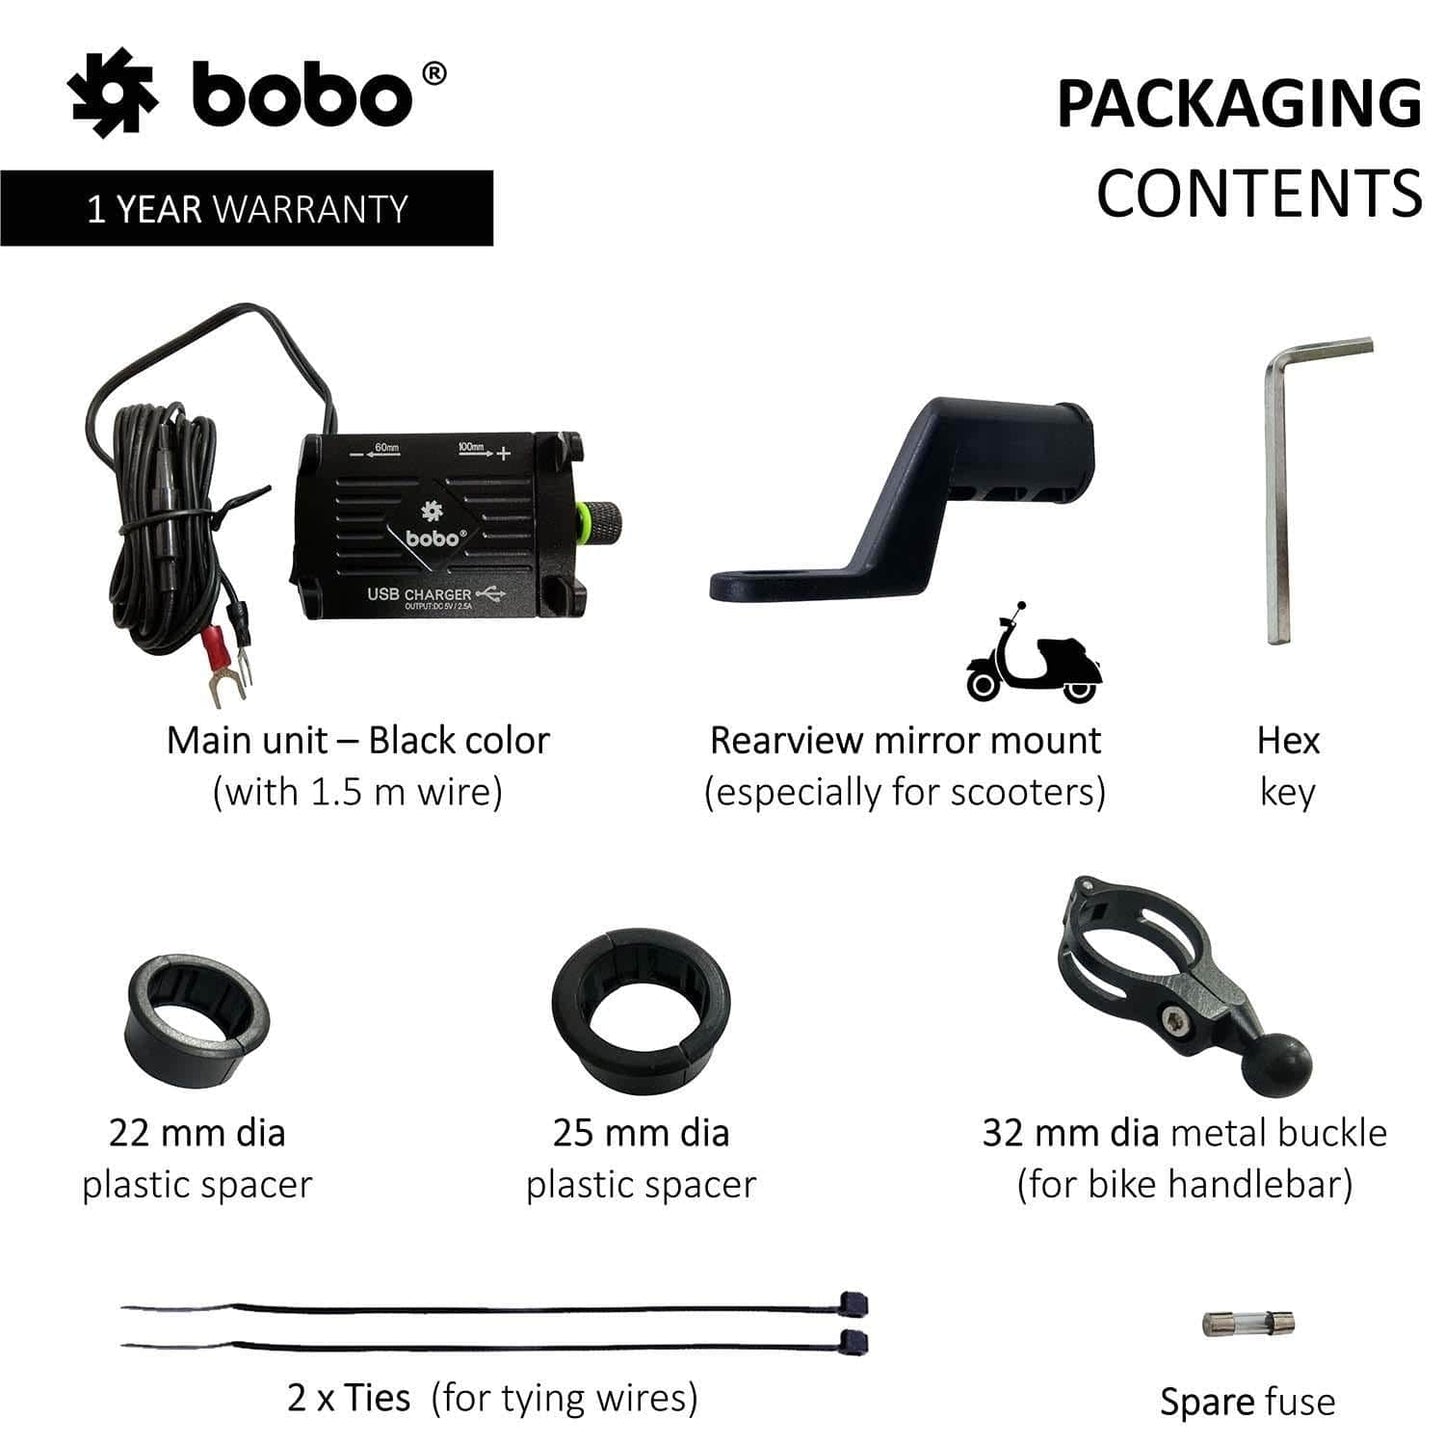 Bobo Gears BOBO BM2 Claw-Grip Aluminium Bike Phone Holder (with 2.5A USB charger) Motorcycle Mobile Mount